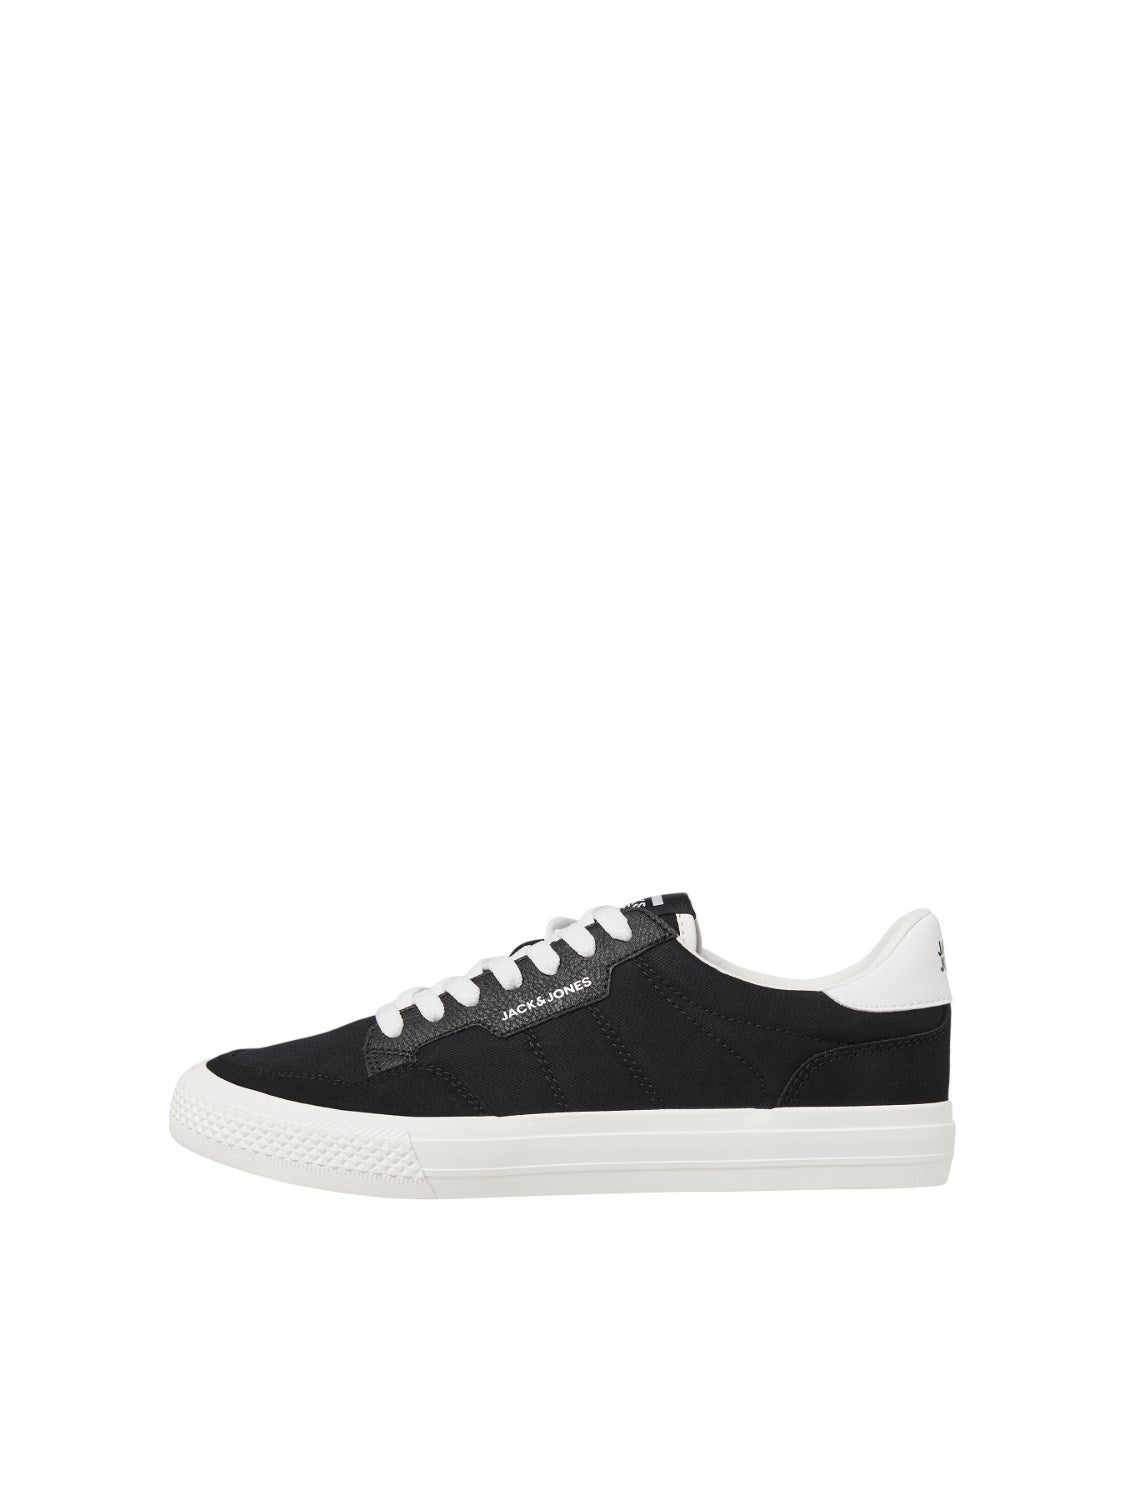 Men's Morden Combo Trainers - Anthracite-Side View